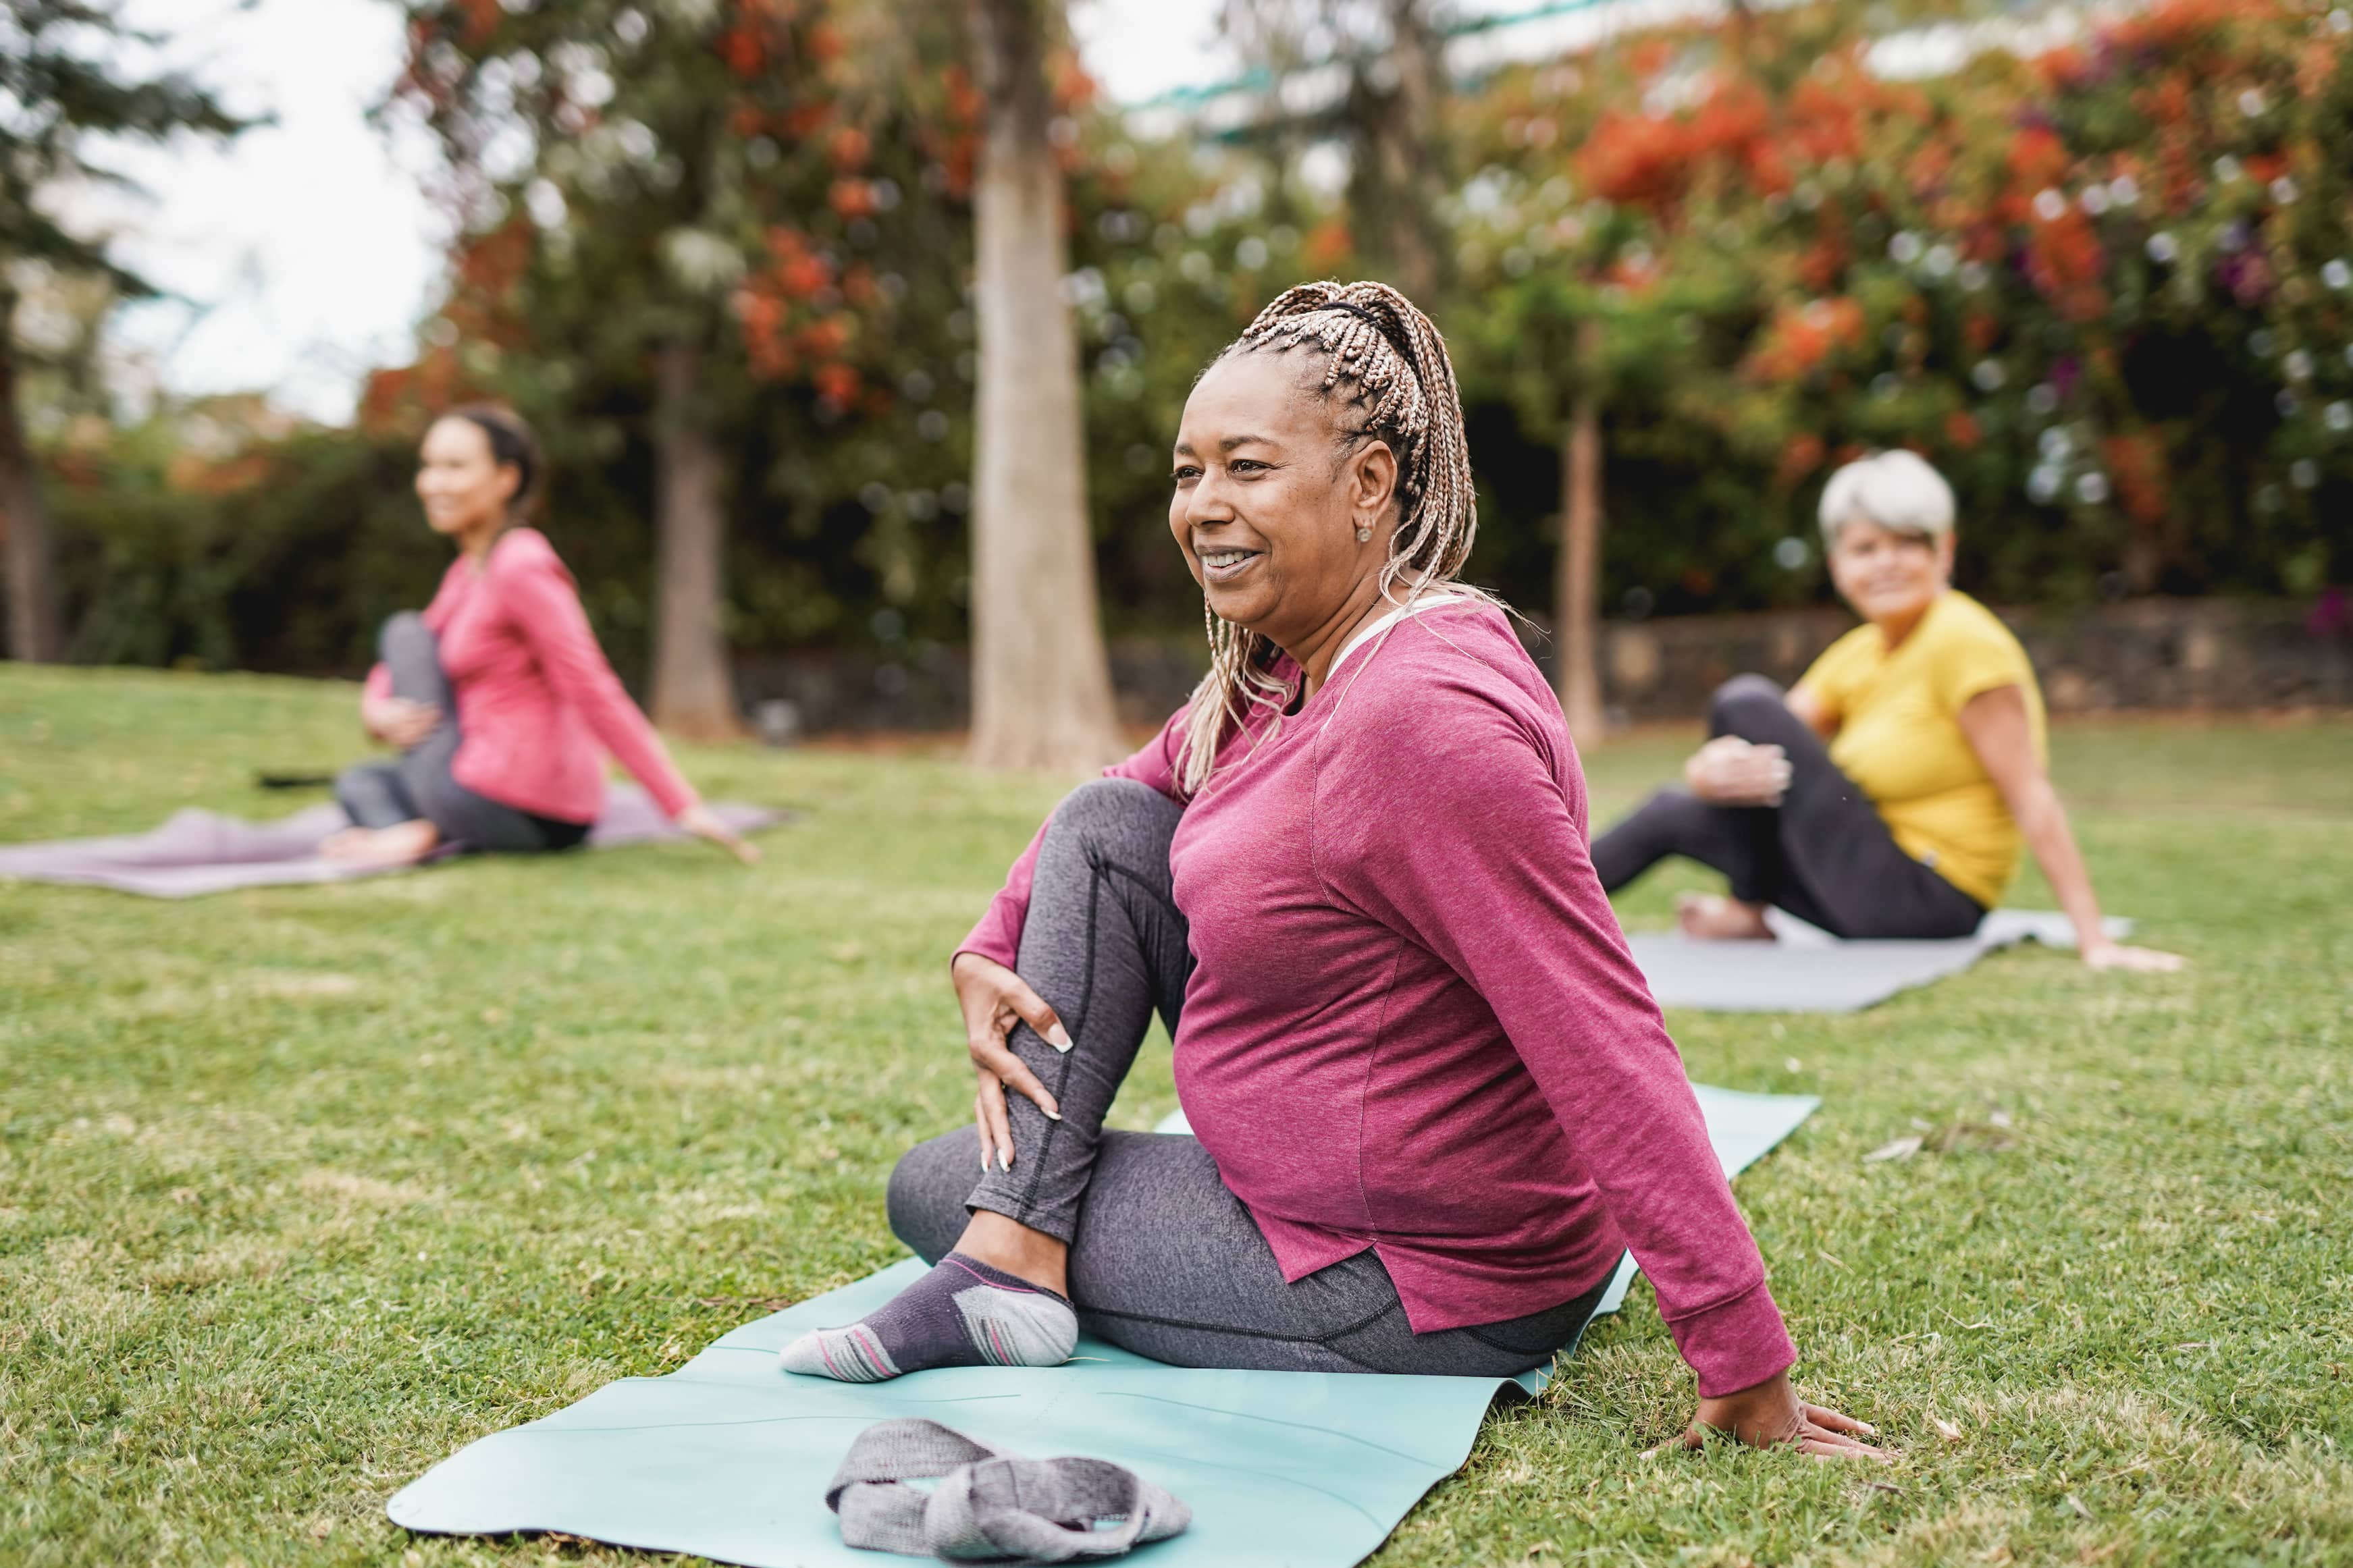 Keeping active can help with menopause symptoms and improve your mood